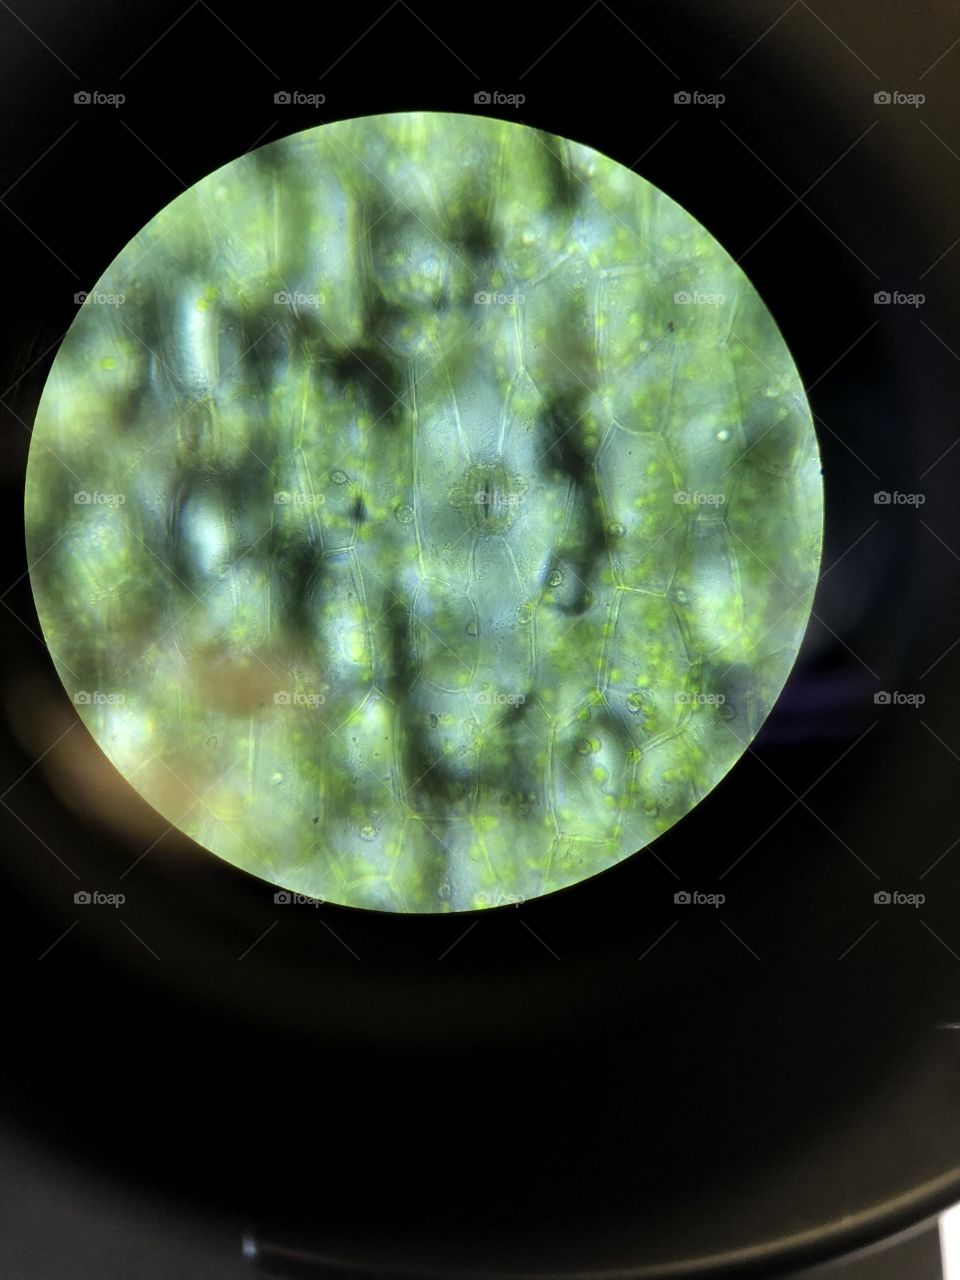 Utilized a compound microscope at 40x magnification to capture the cells inside an aloe Vera plant 